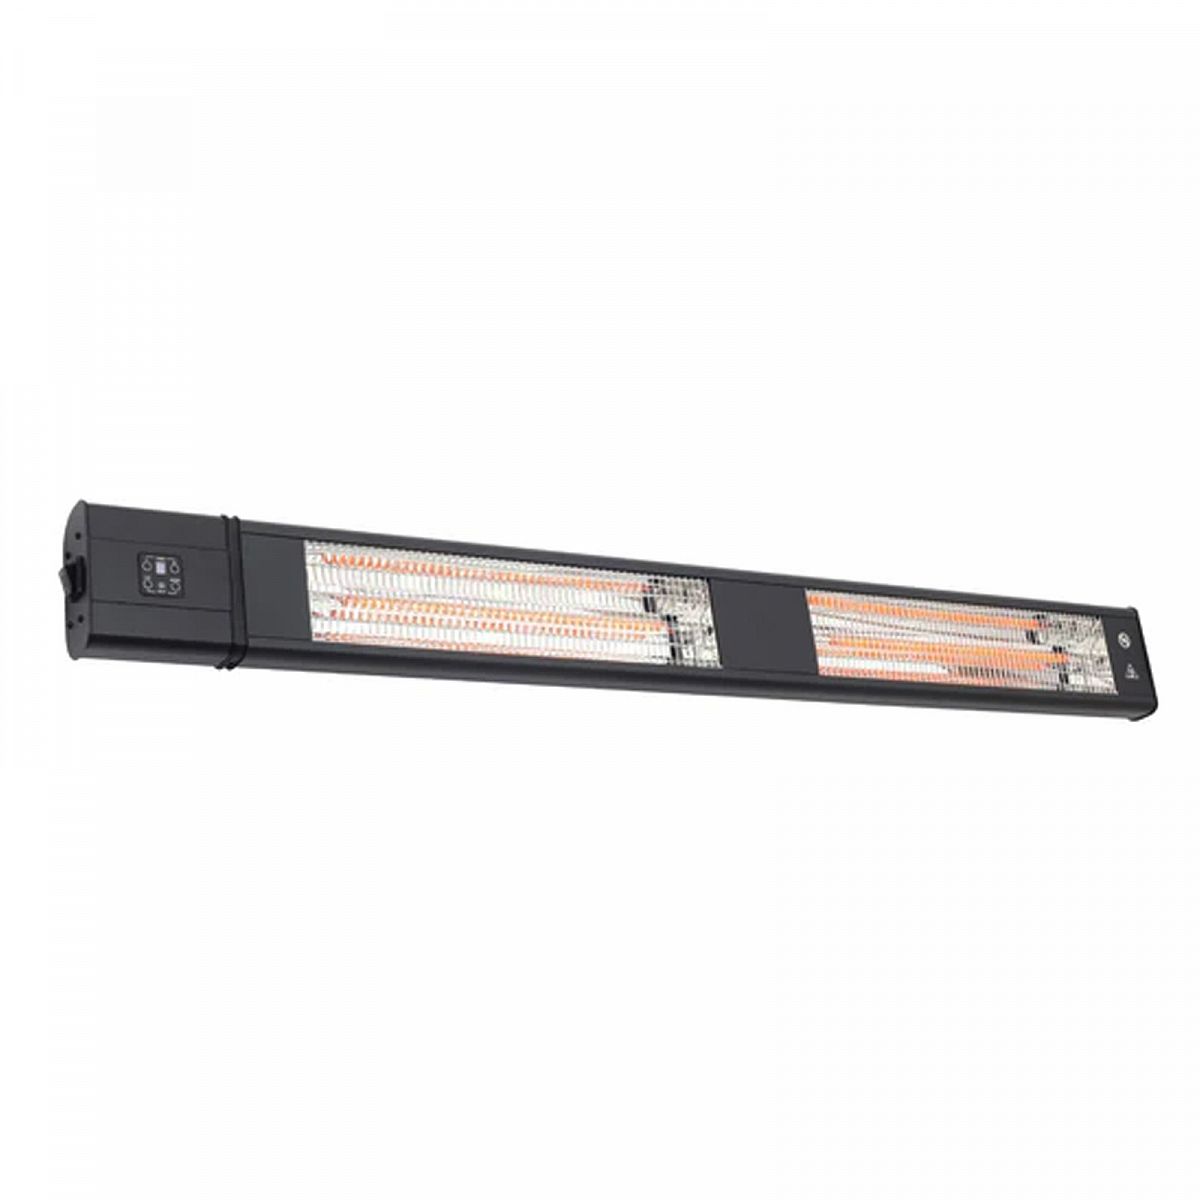 Glow Outdoor Wall Mounted Patio Heater by Radiant